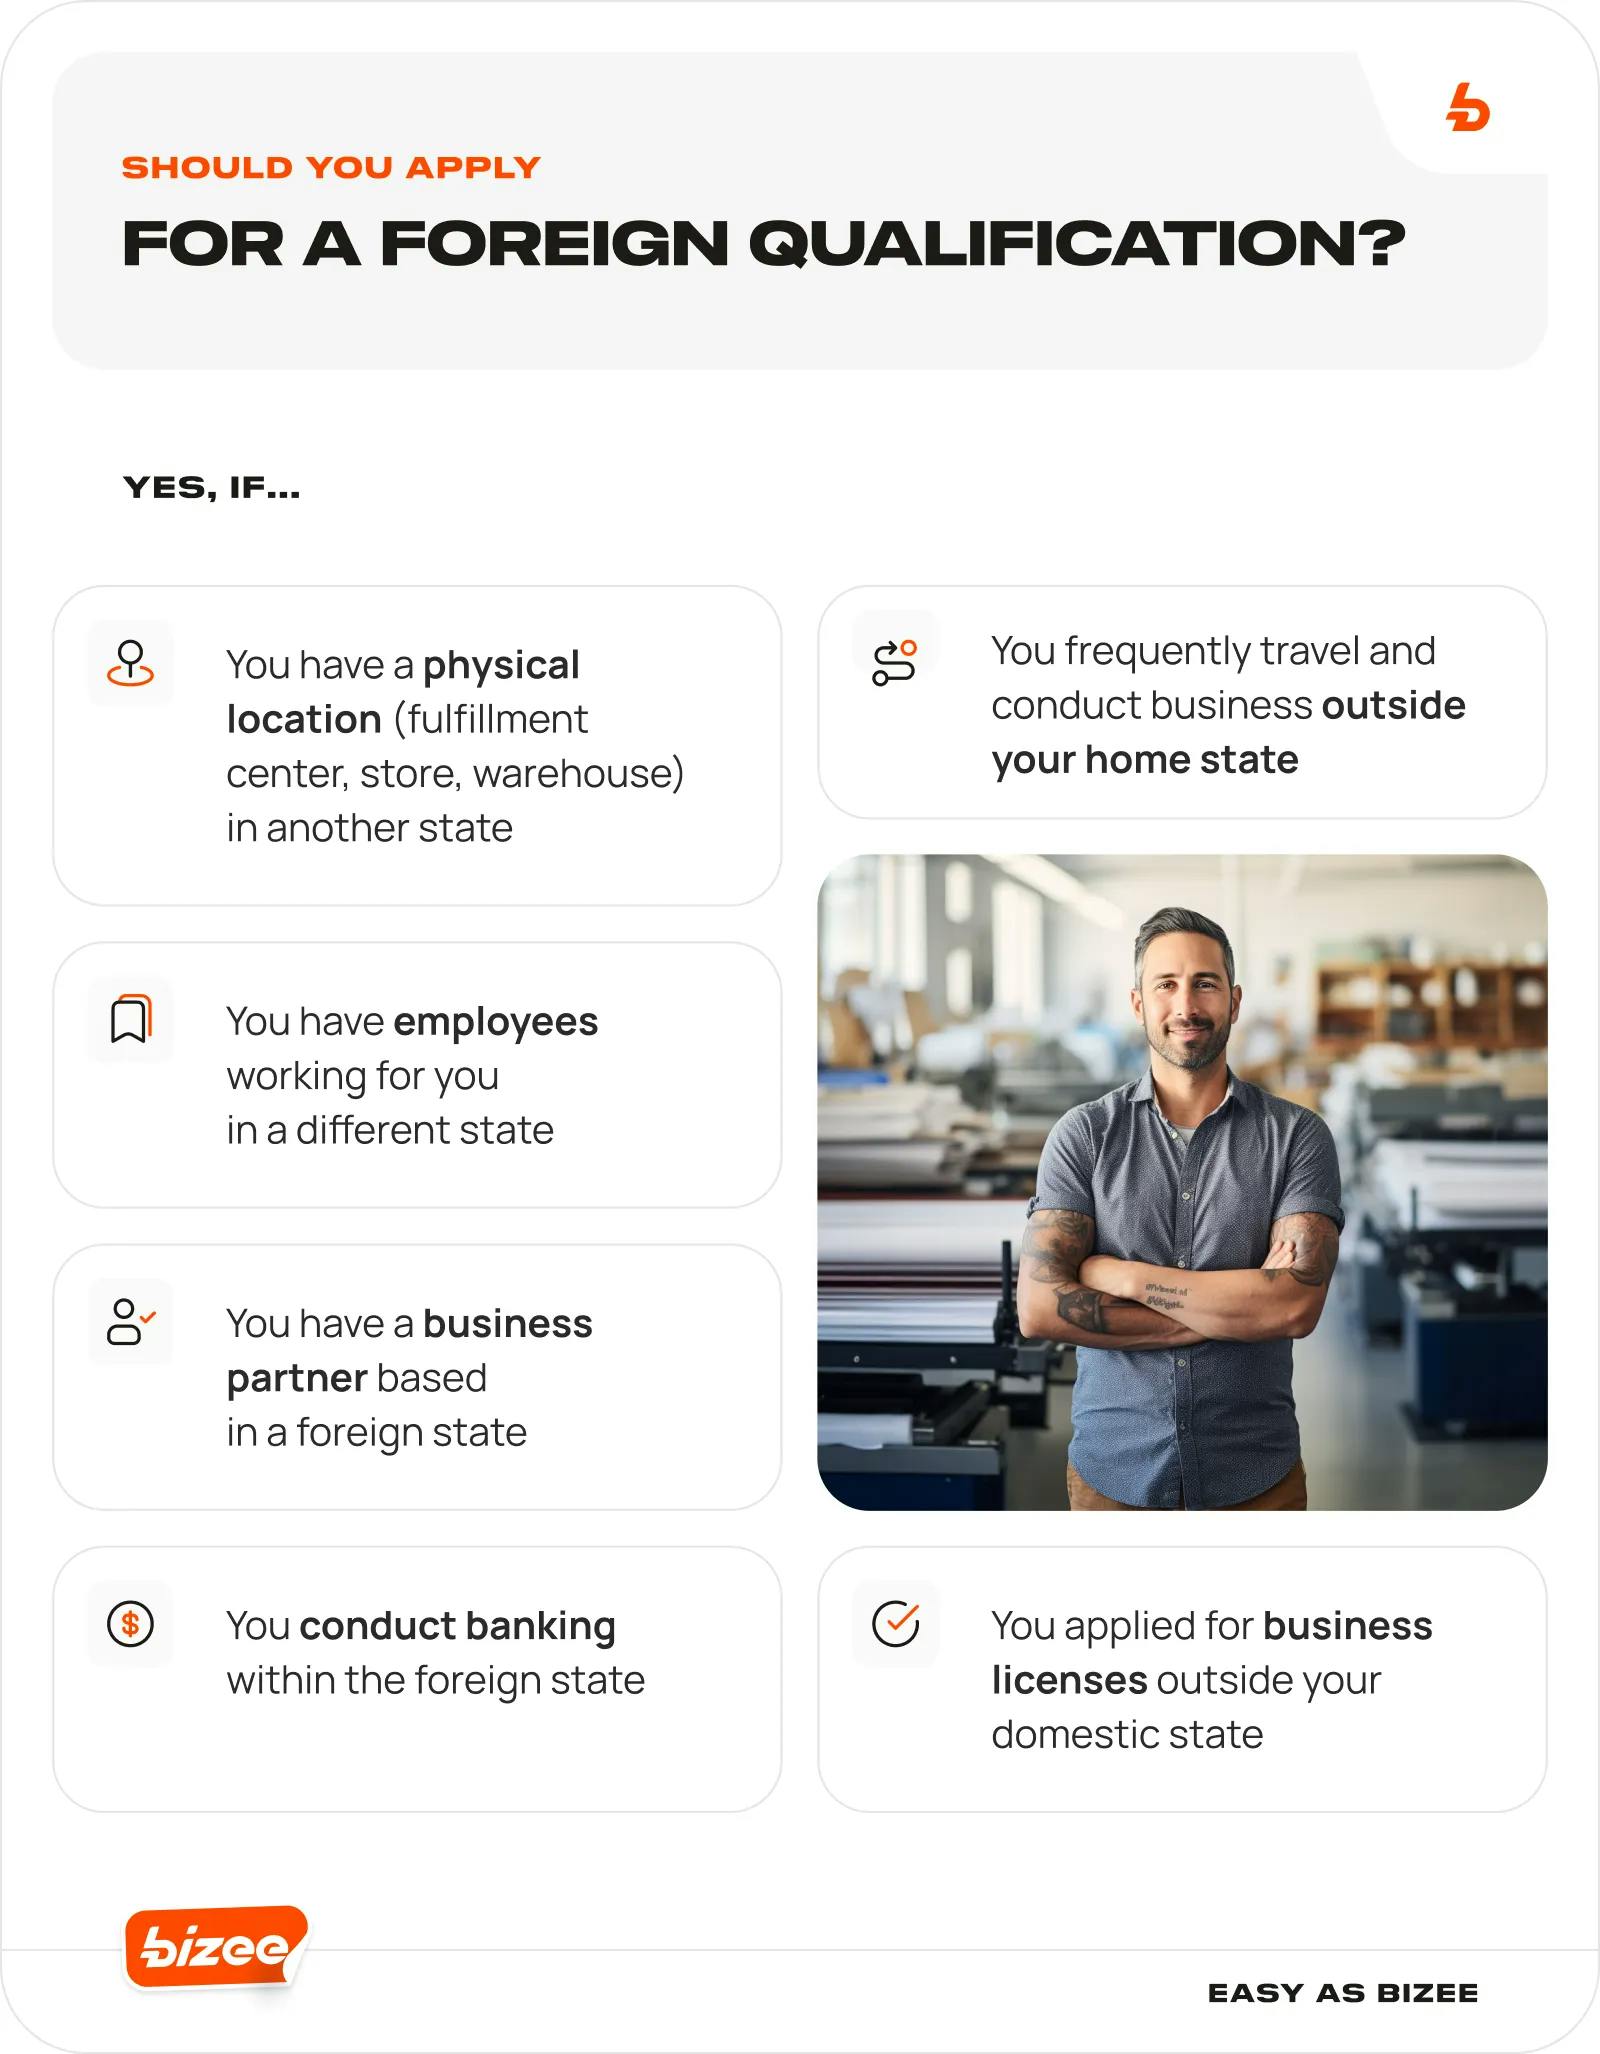 Should You Apply for a Foreign Qualification